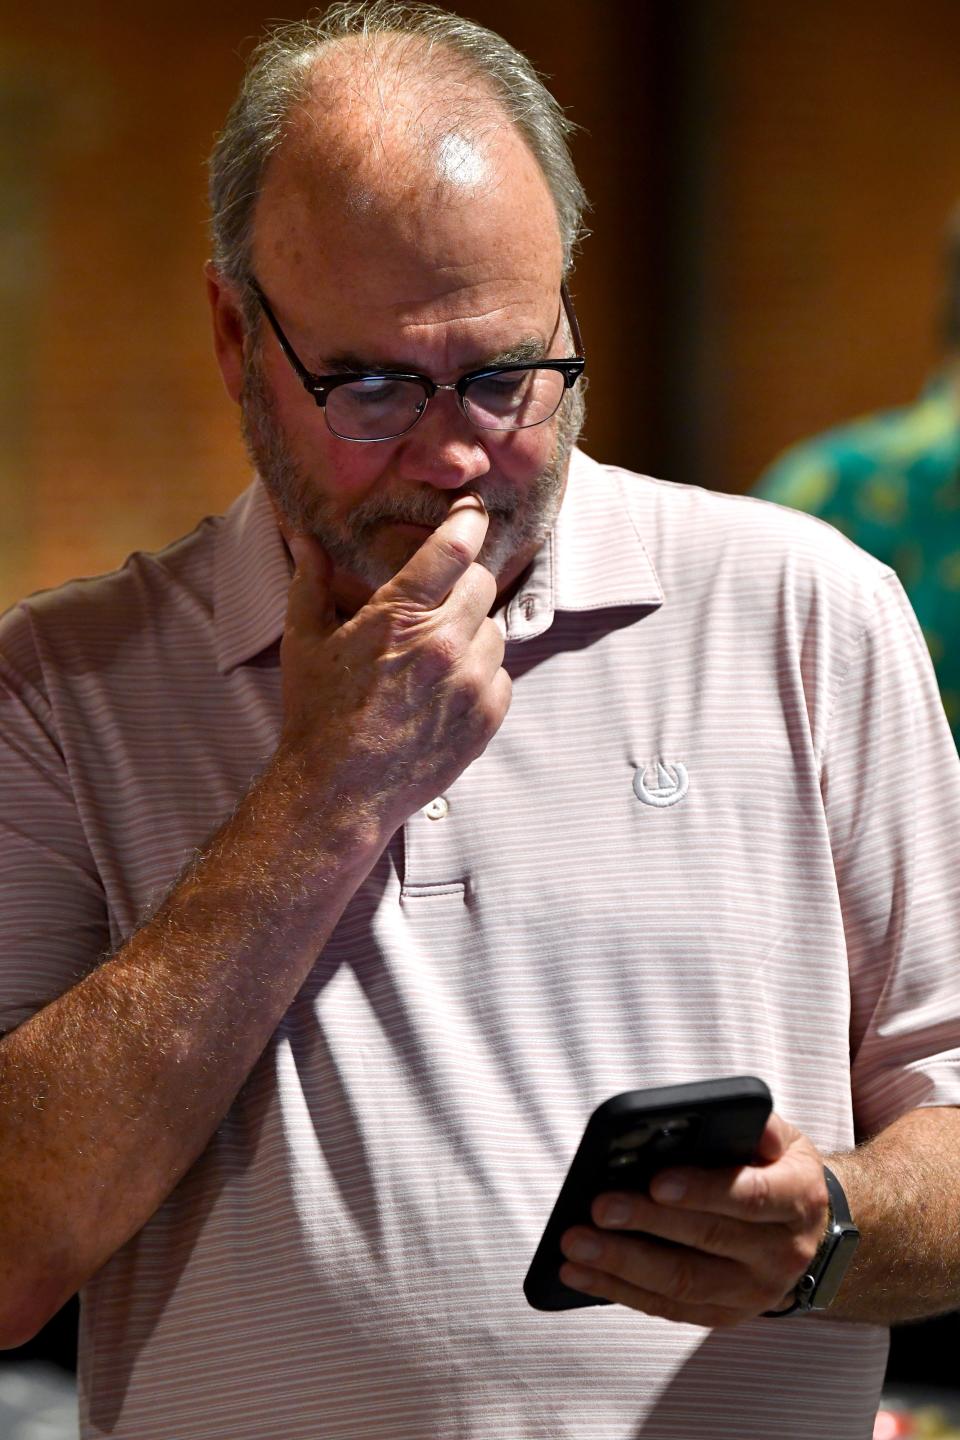 Scott Beard checks election results on his phone during the watch party for his Abilene City Council Place 4 race Saturday.